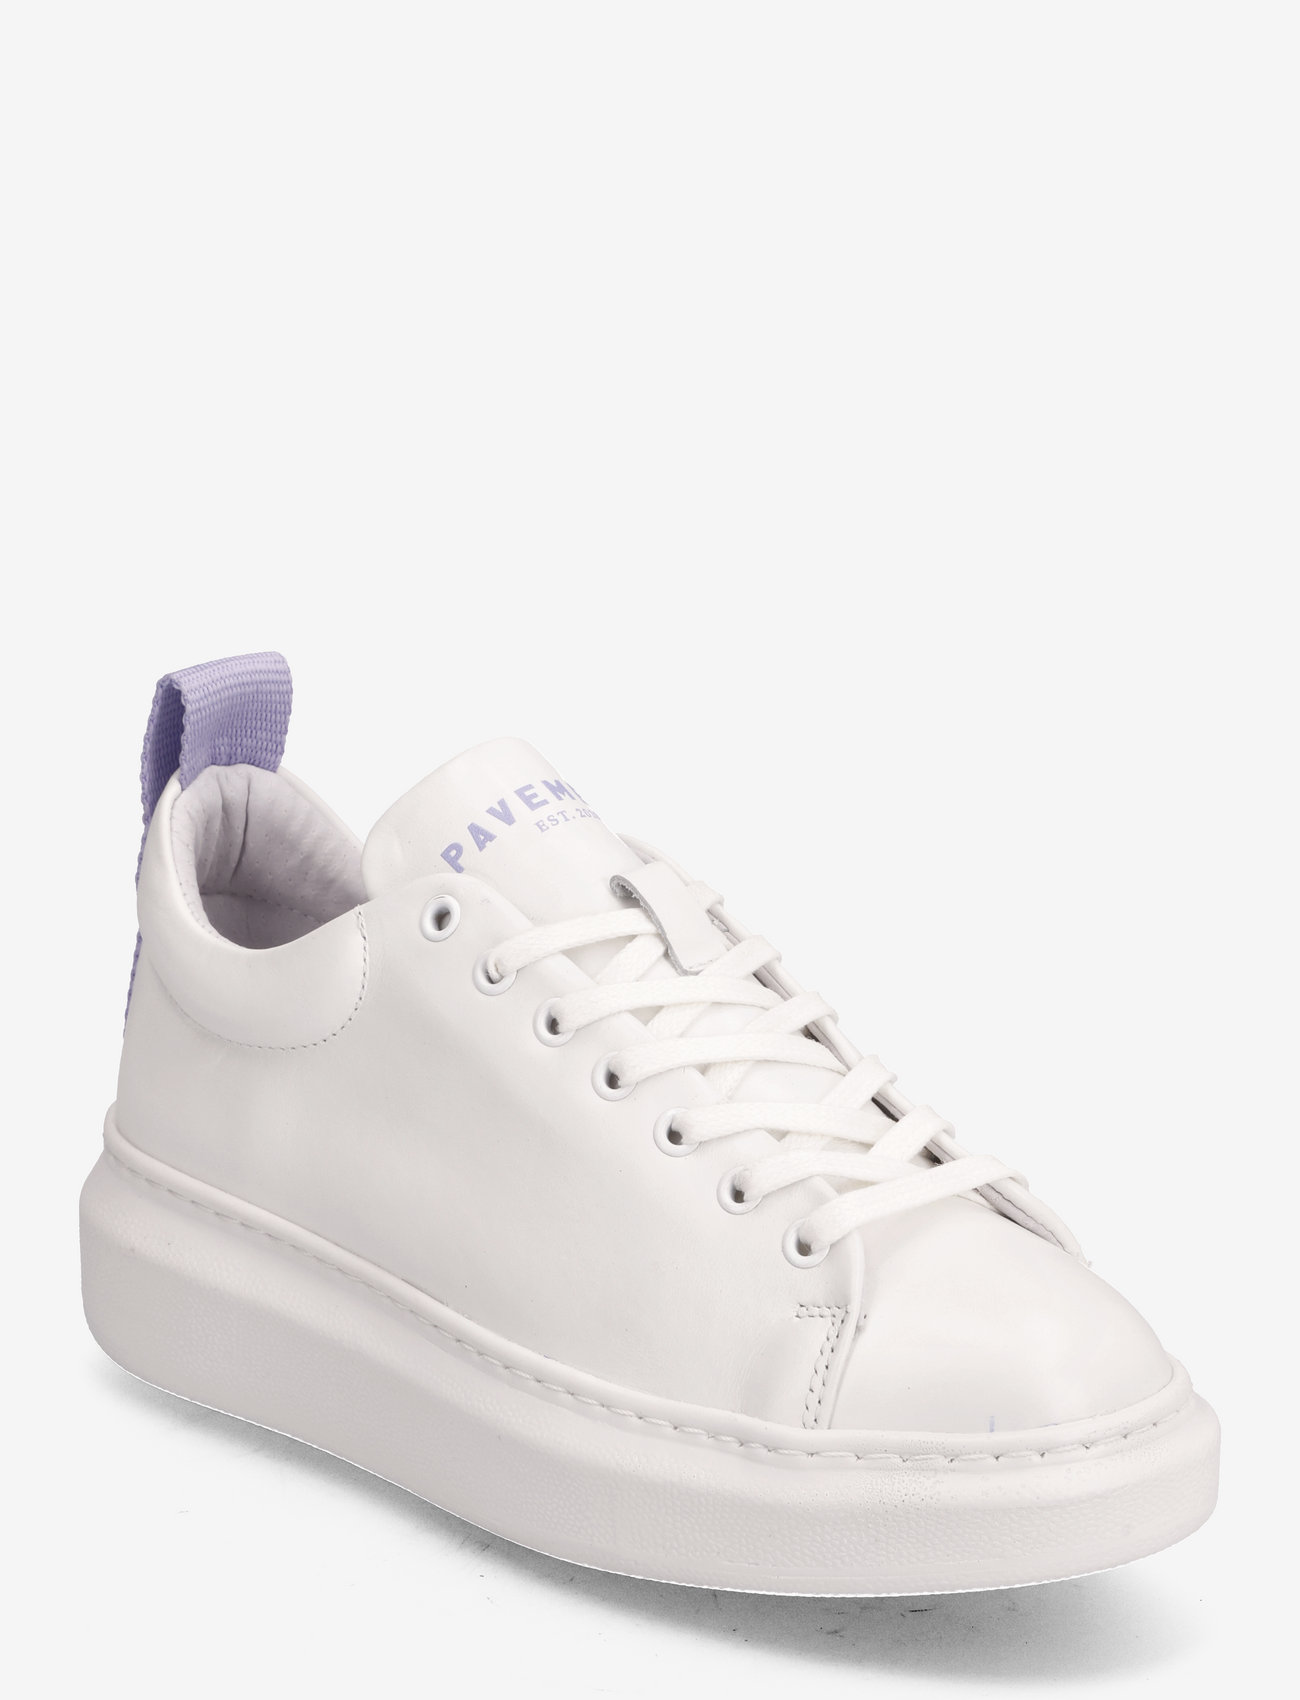 Pavement - Dee color - lage sneakers - white/purple - 0